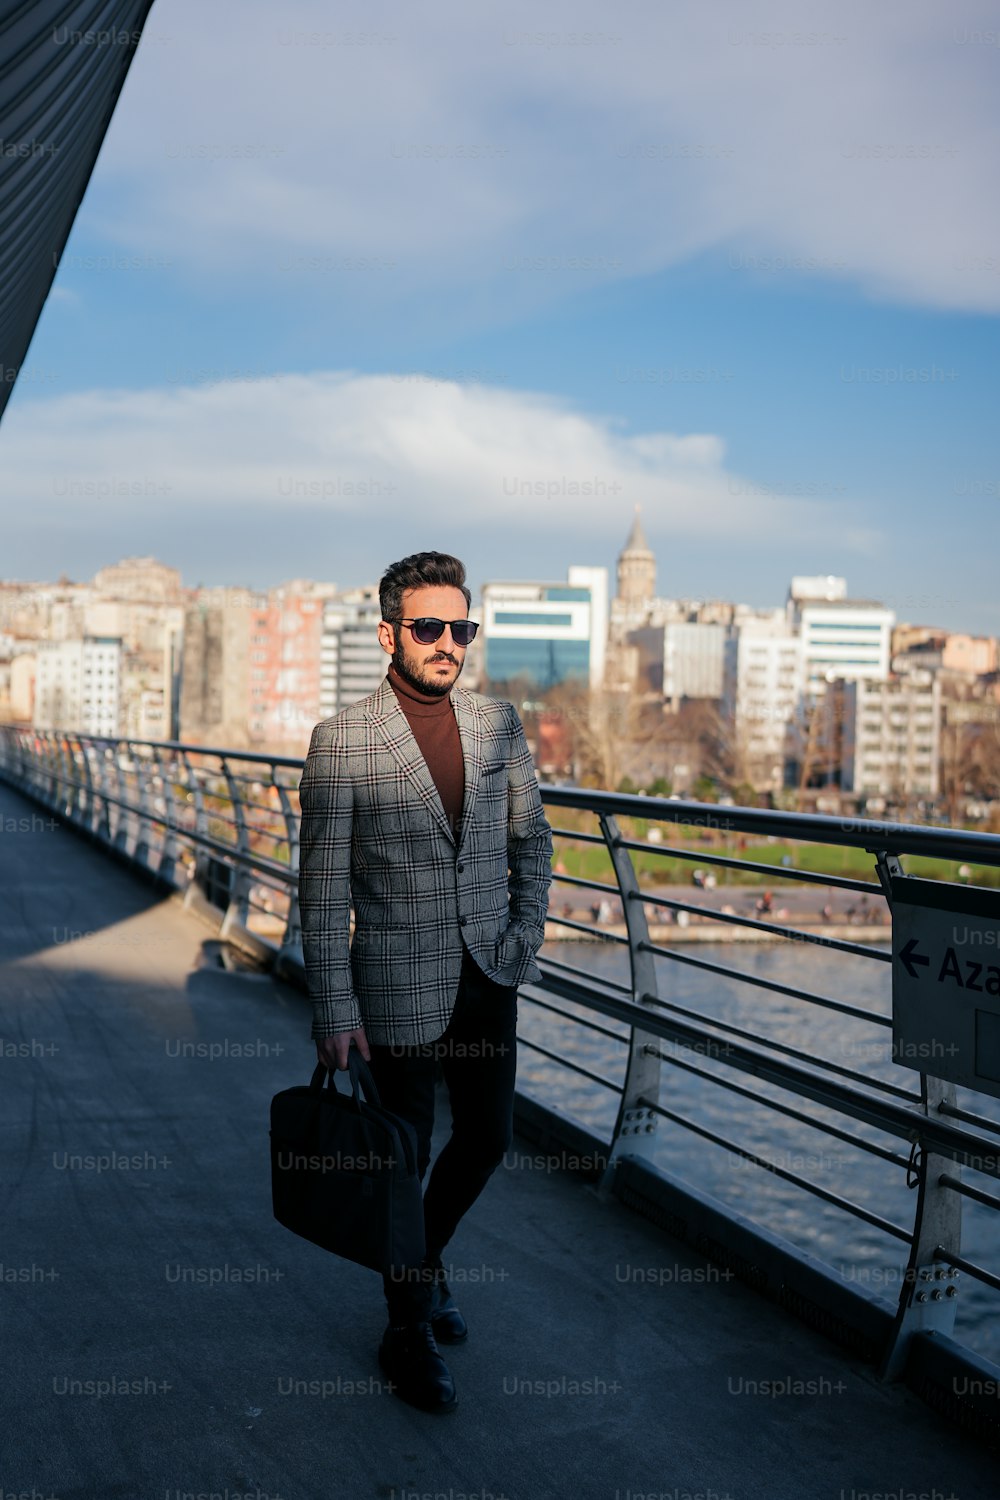 a man in a suit and sunglasses walking across a bridge